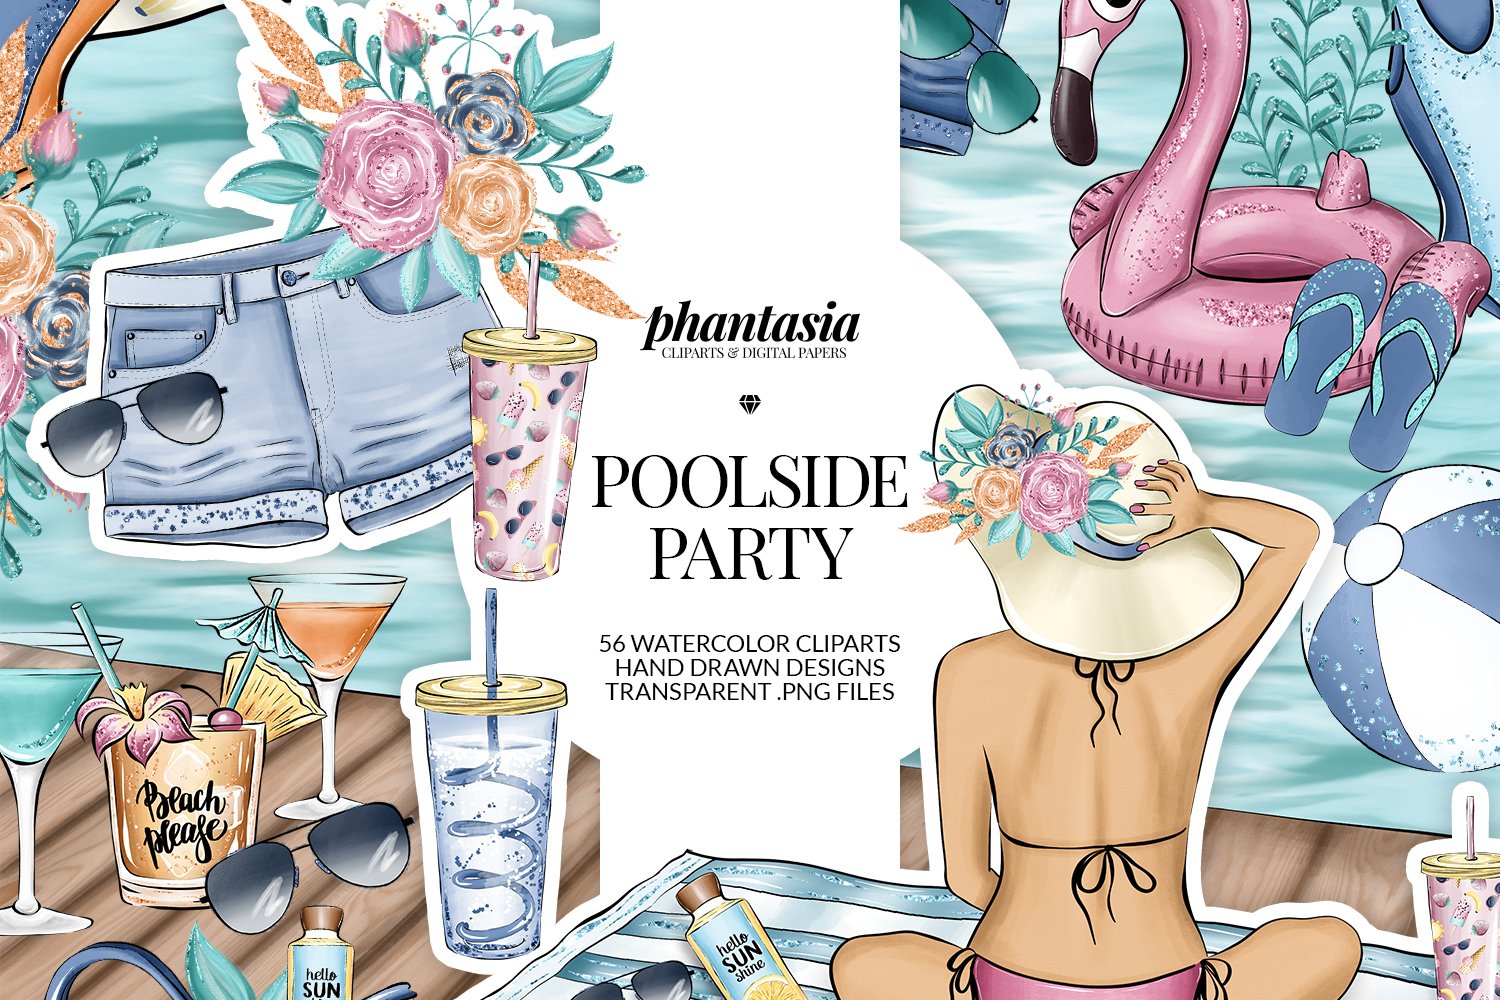 Poolside Watercolor Cliparts cover image.